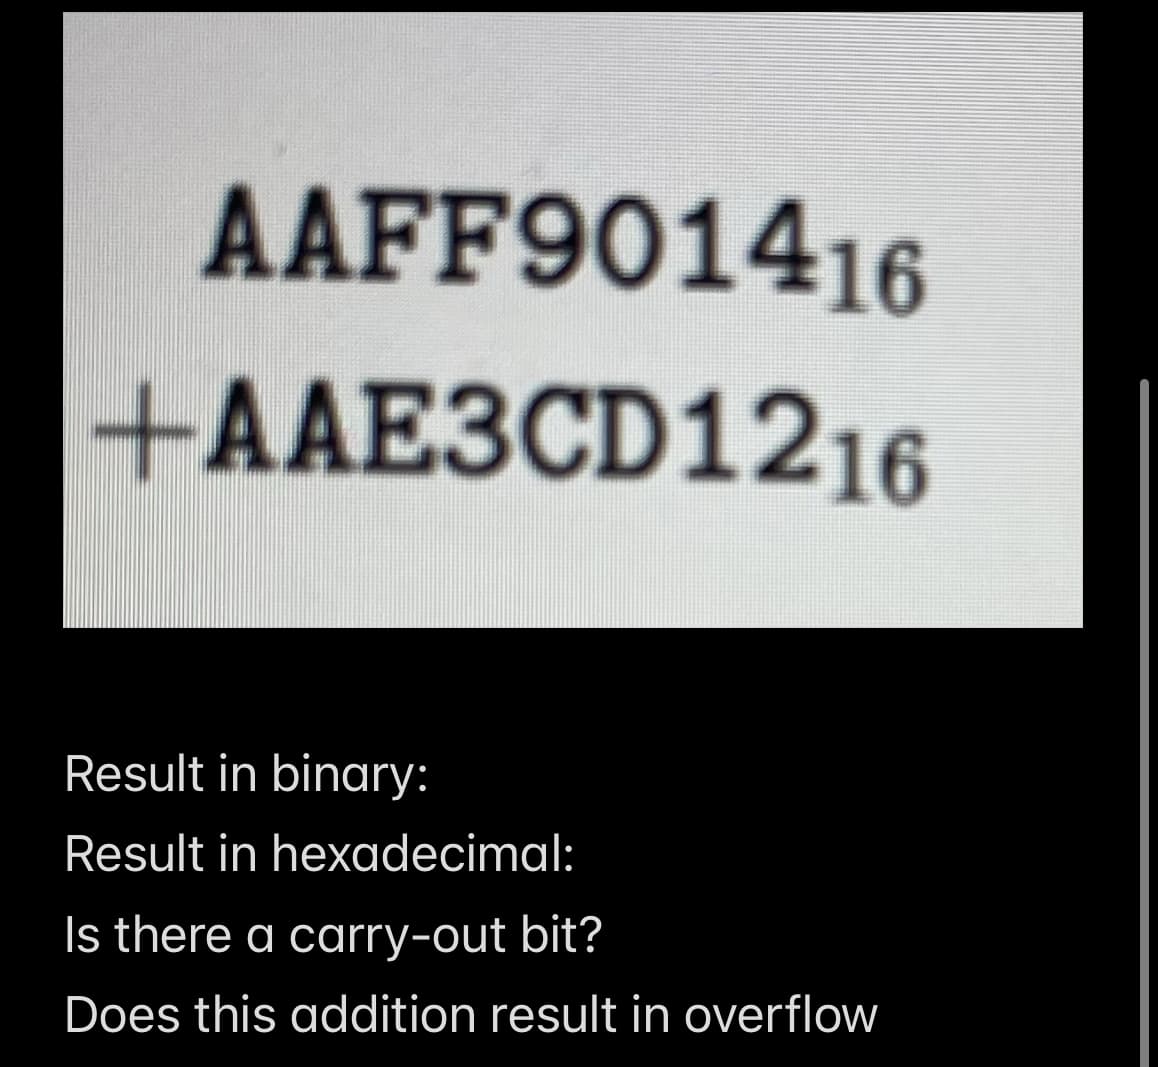 AAFF901416
+AAE3CD1216
Result in binary:
Result in hexadecimal:
Is there a carry-out bit?
Does this addition result in overflow